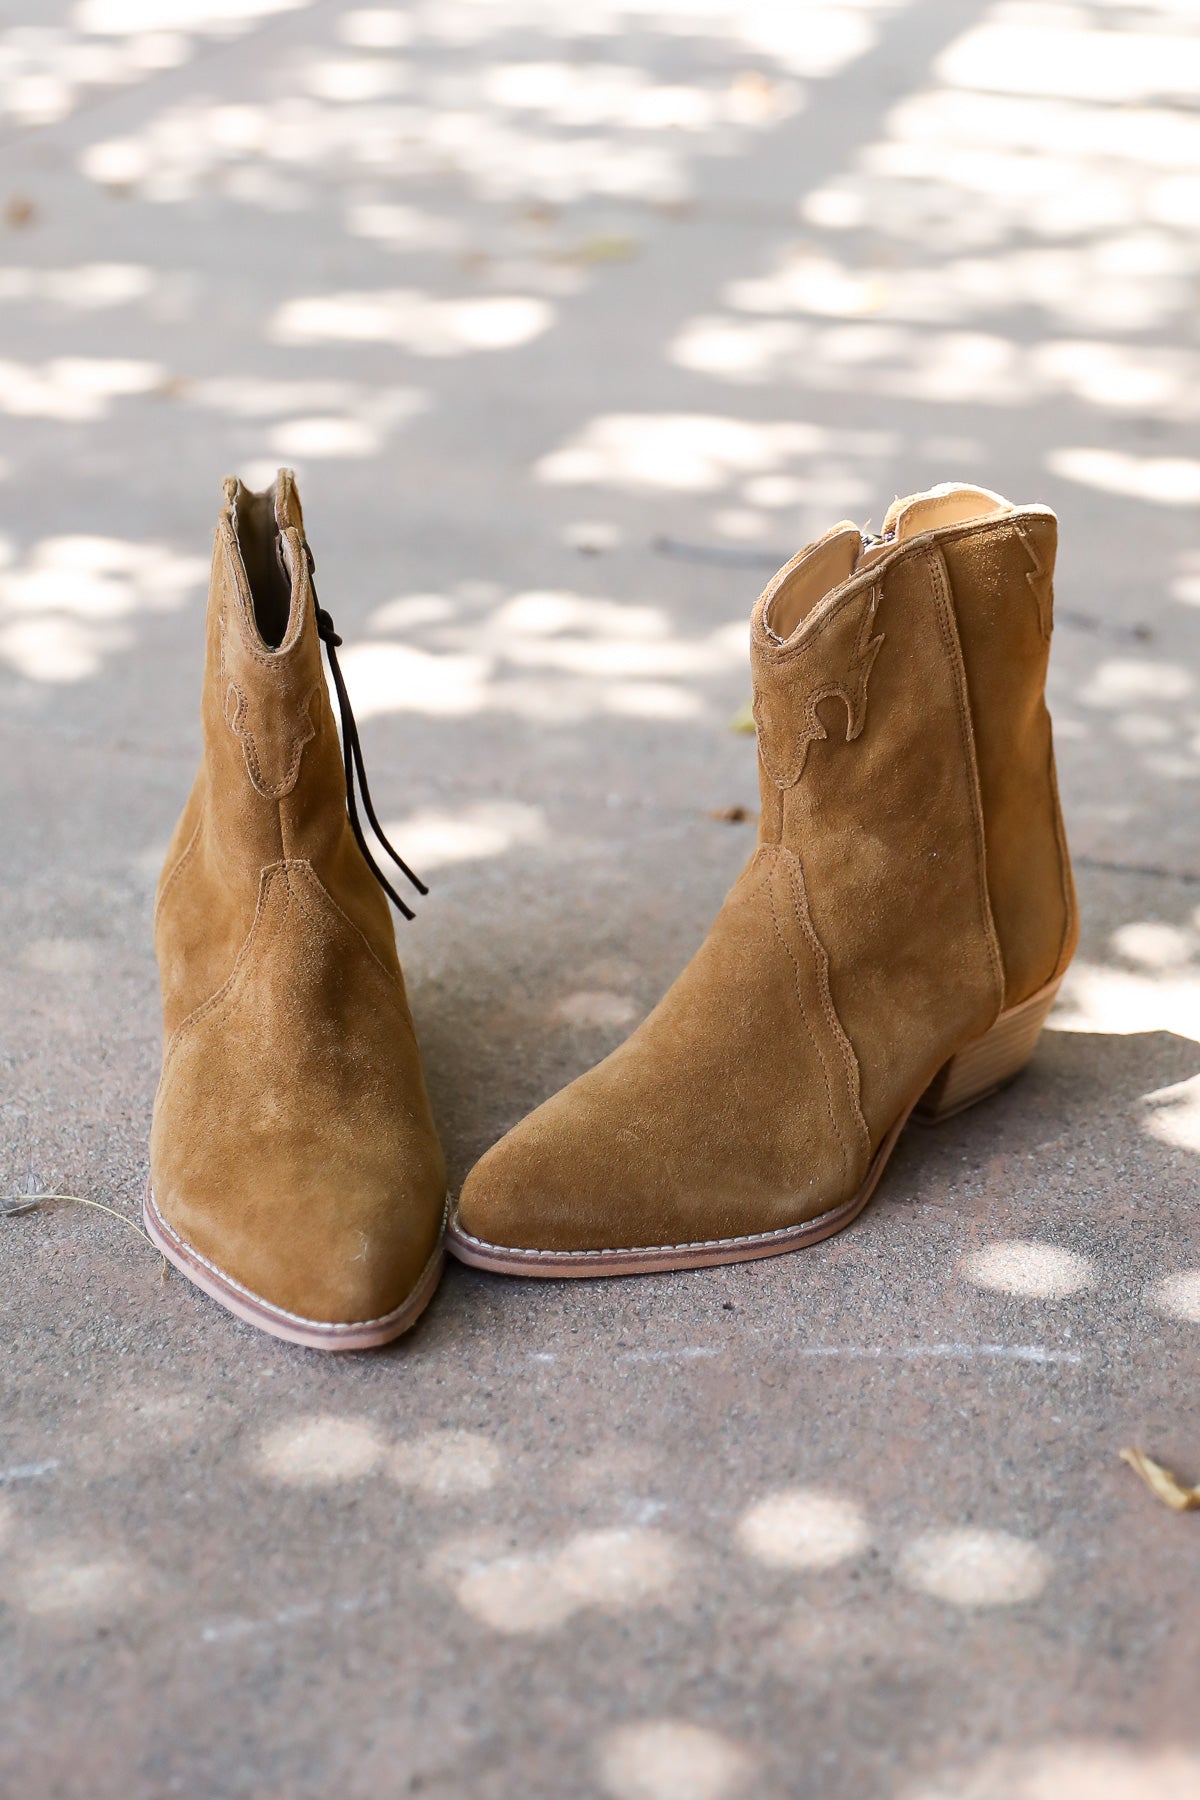 Free People New Frontier Boots | Kariella